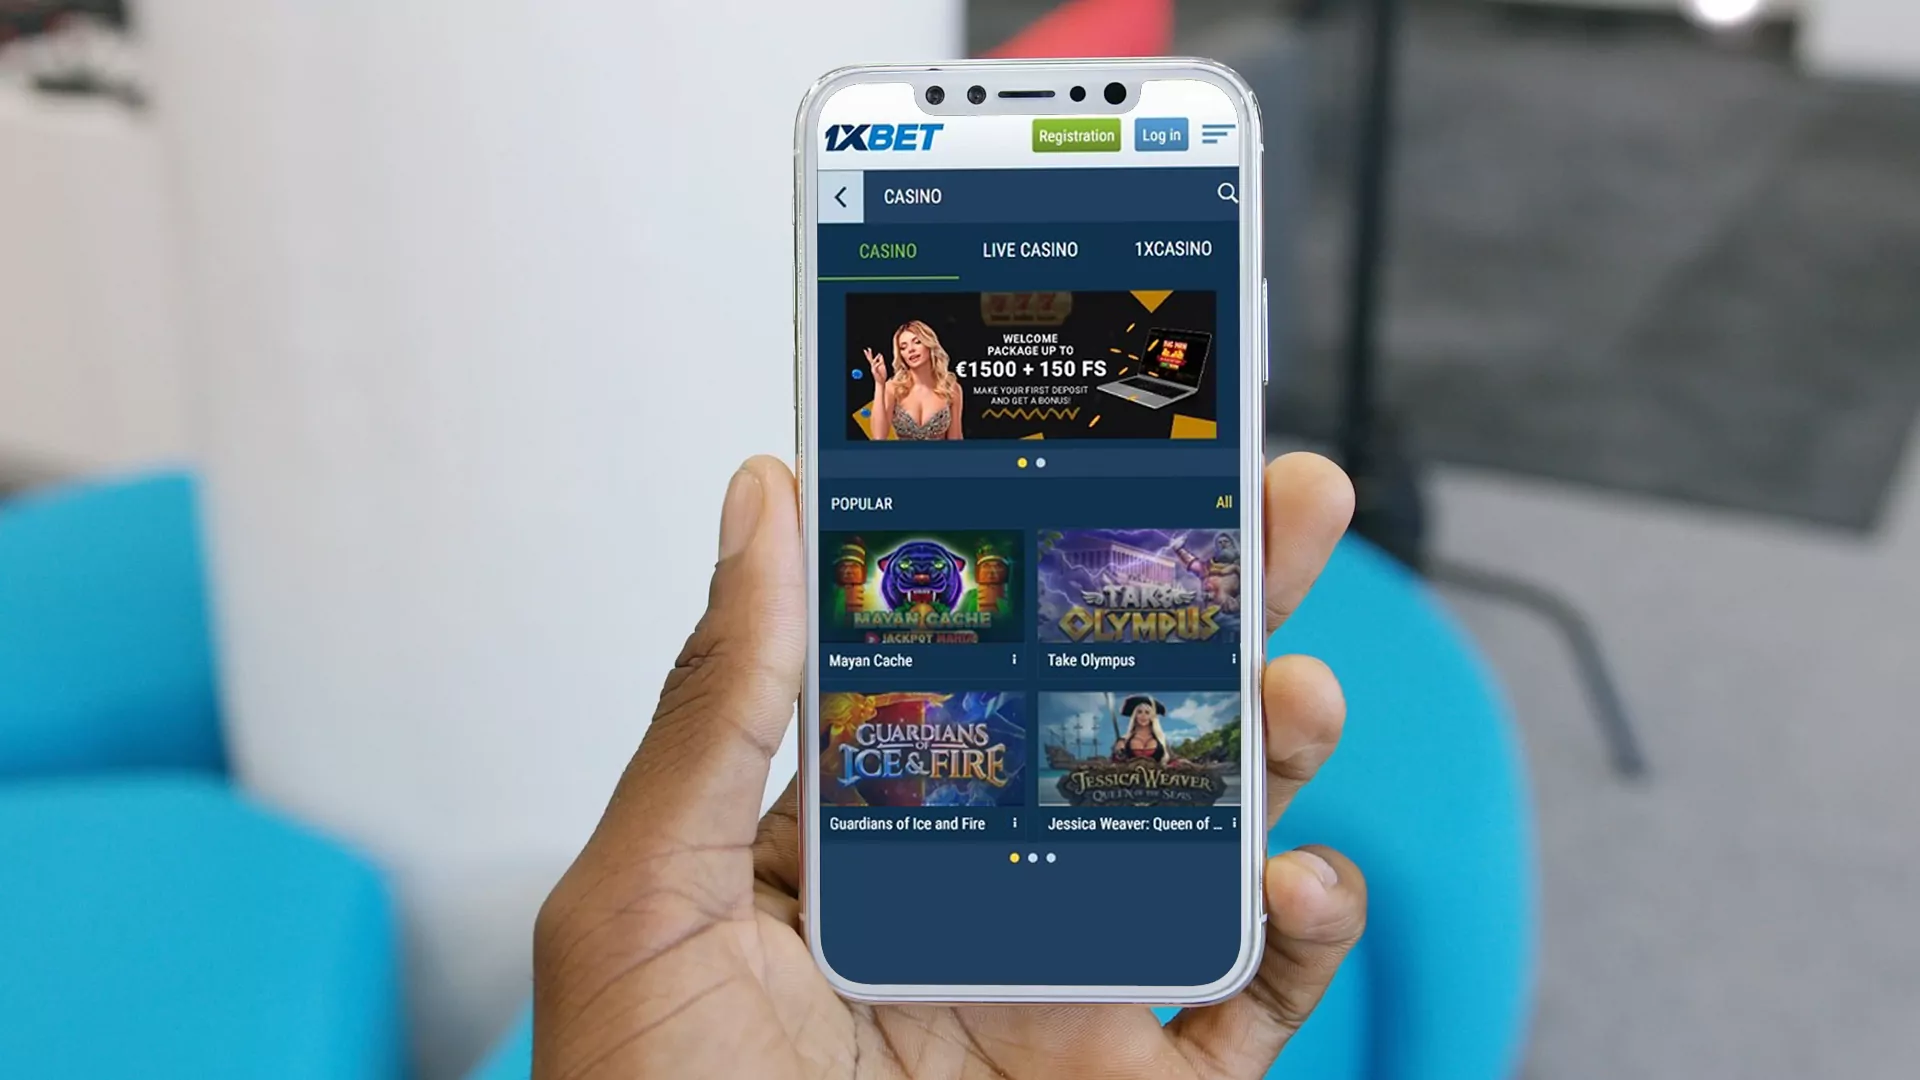 A huge number of casino games are available in the 1xBet mobile app.